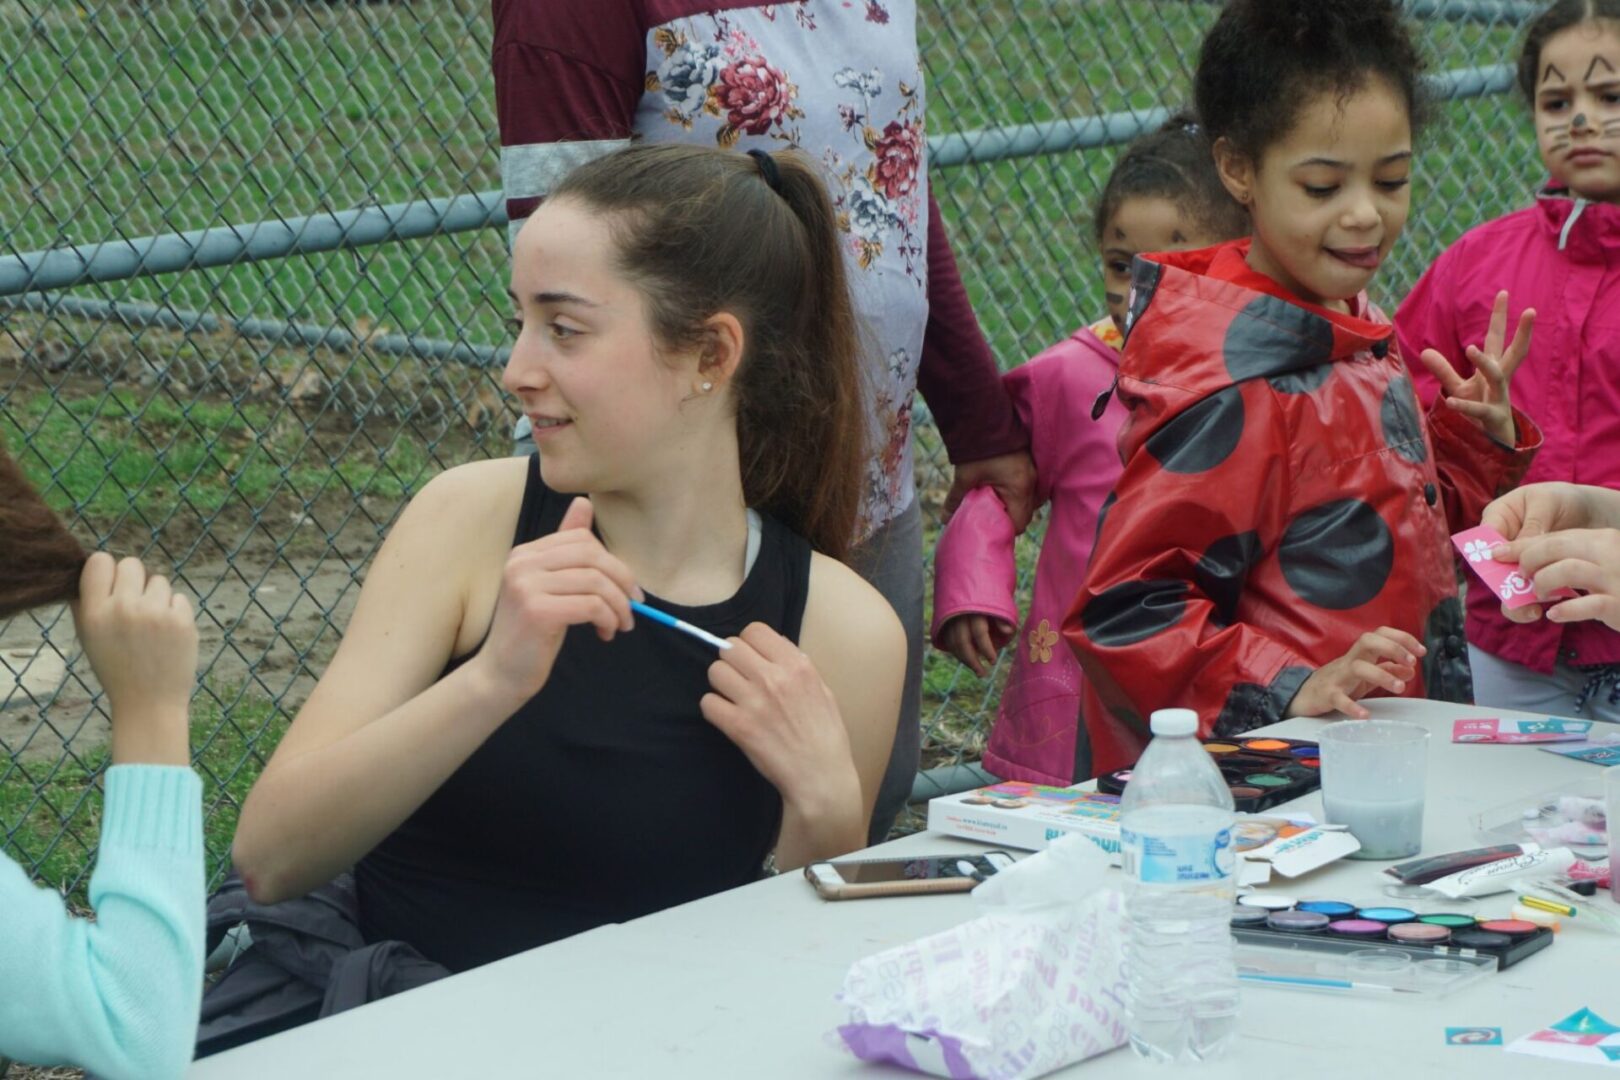 One of the artists wearing a black top and holding a blue paint brush and some kids in the background